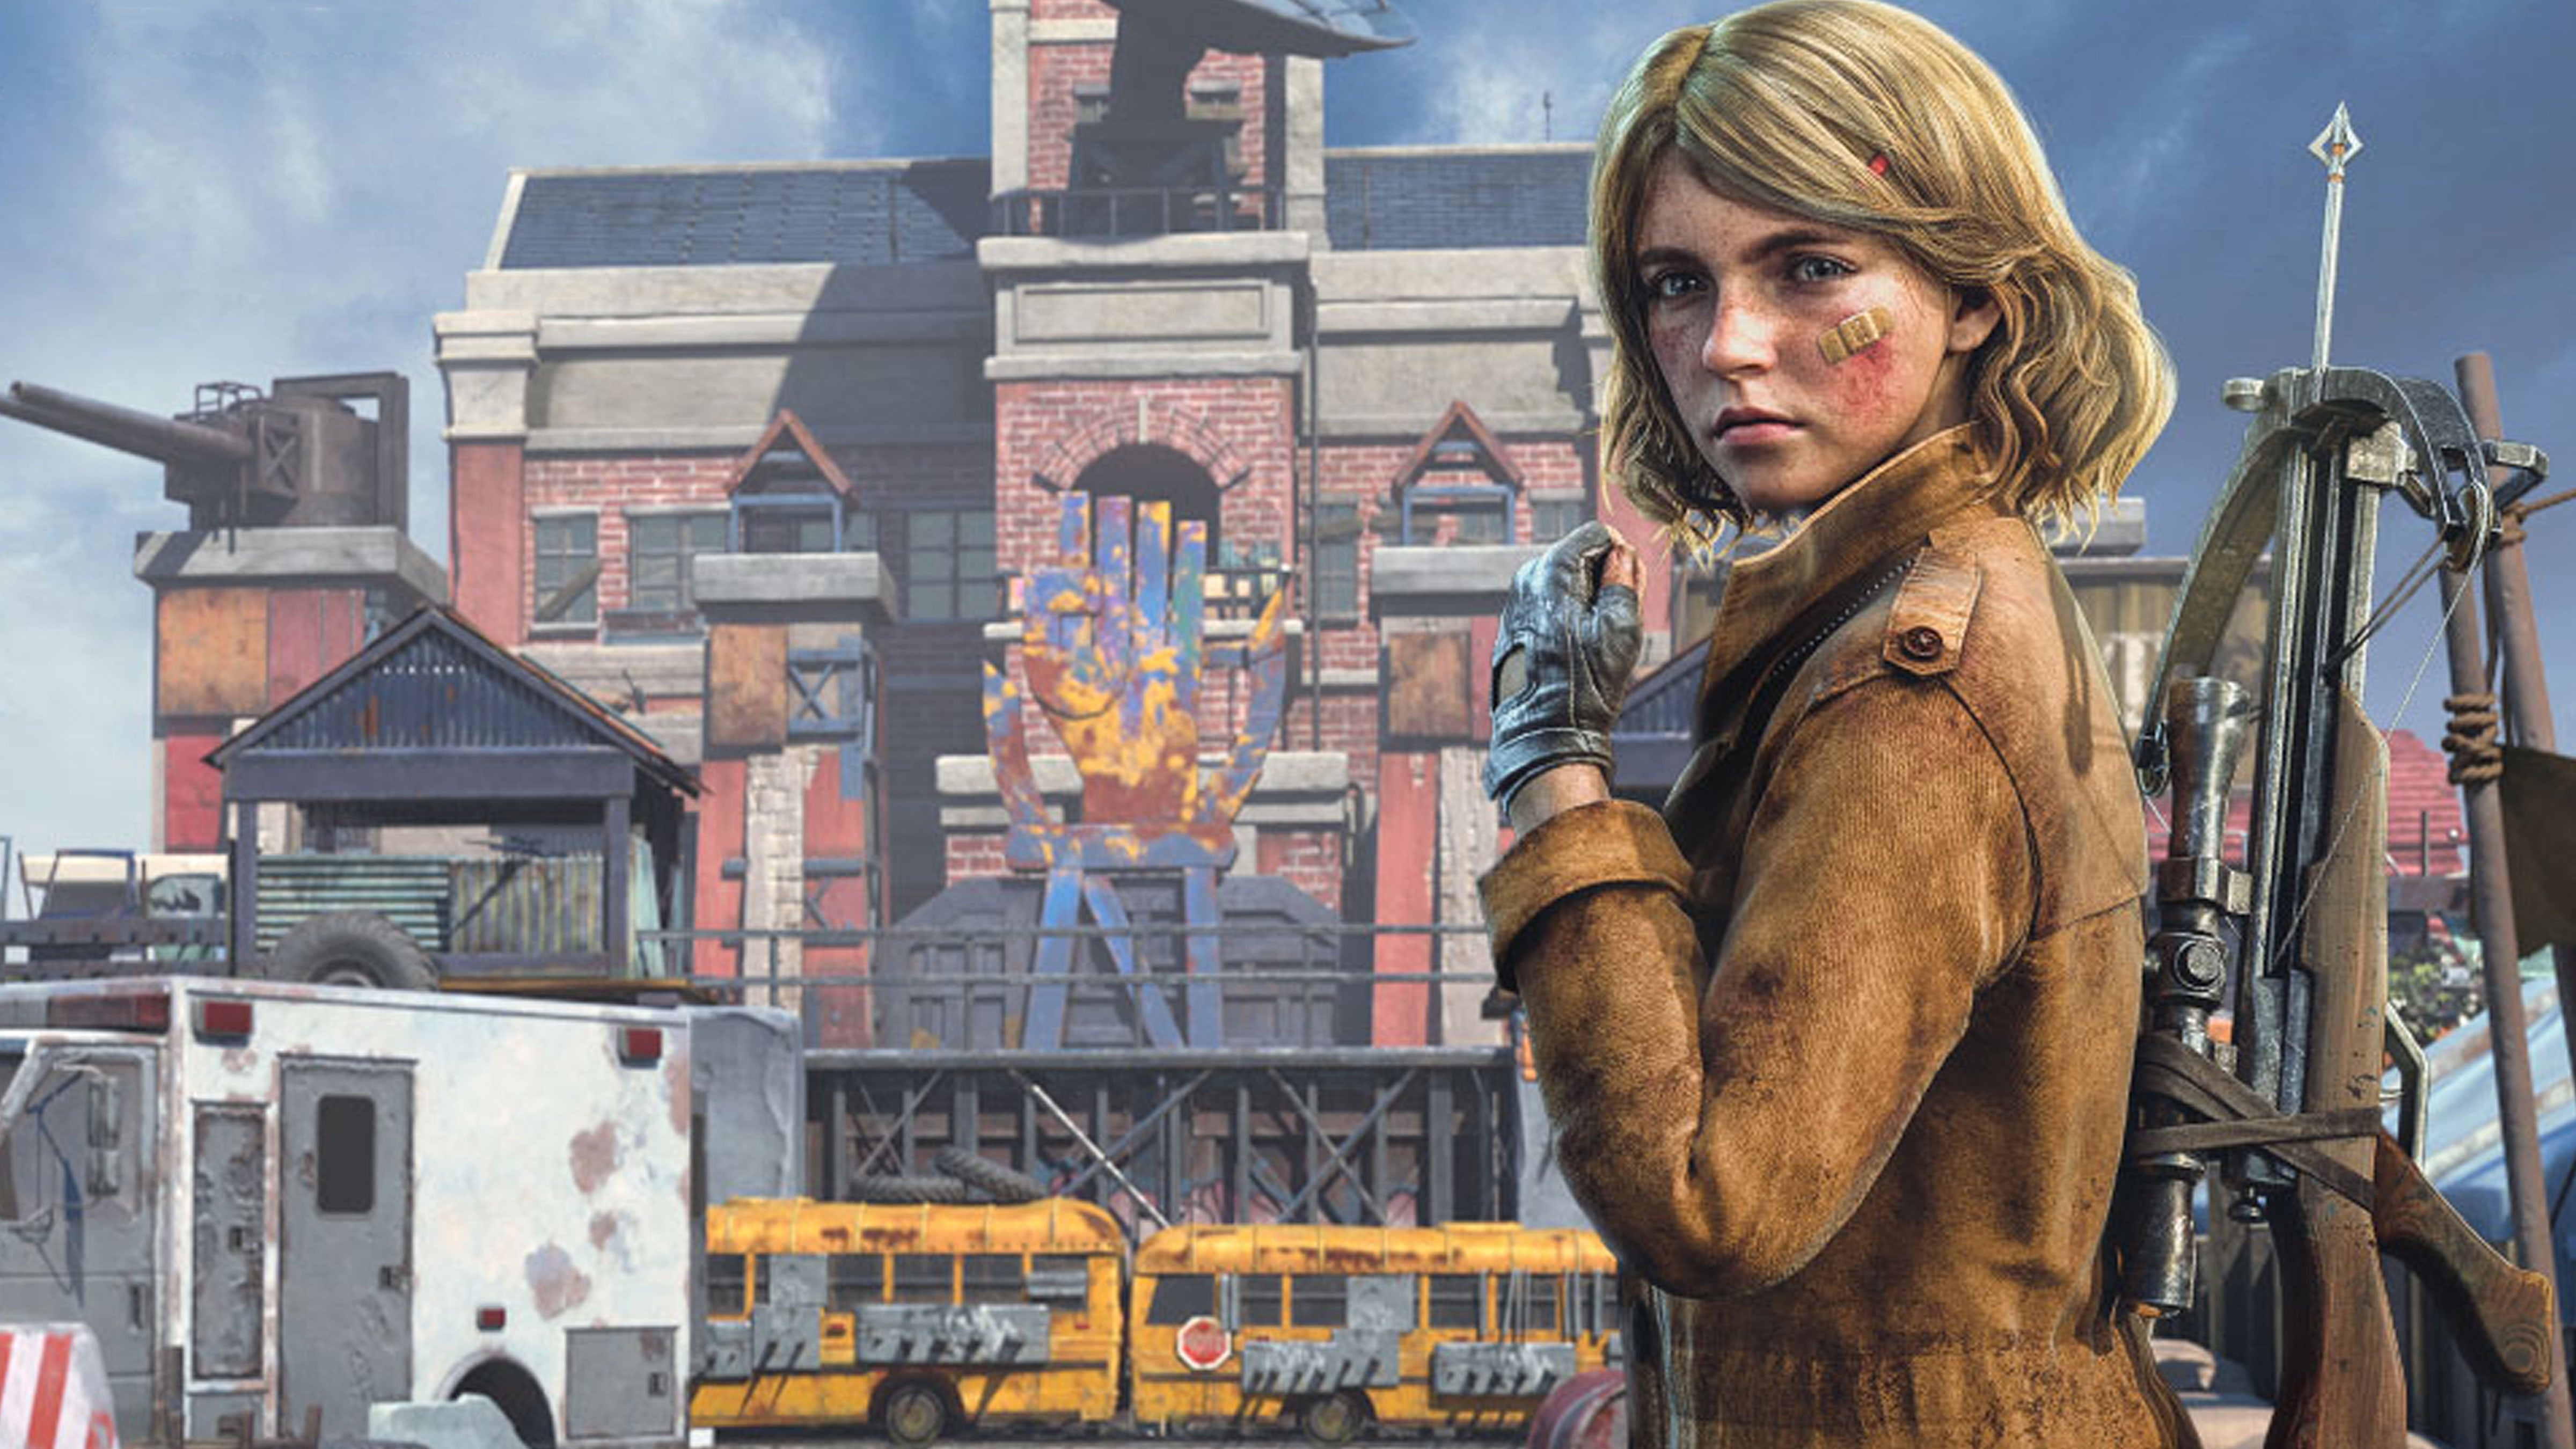 Artwork for mobile game State of Survival showing a young girl with a rifle standing by a fortified base.